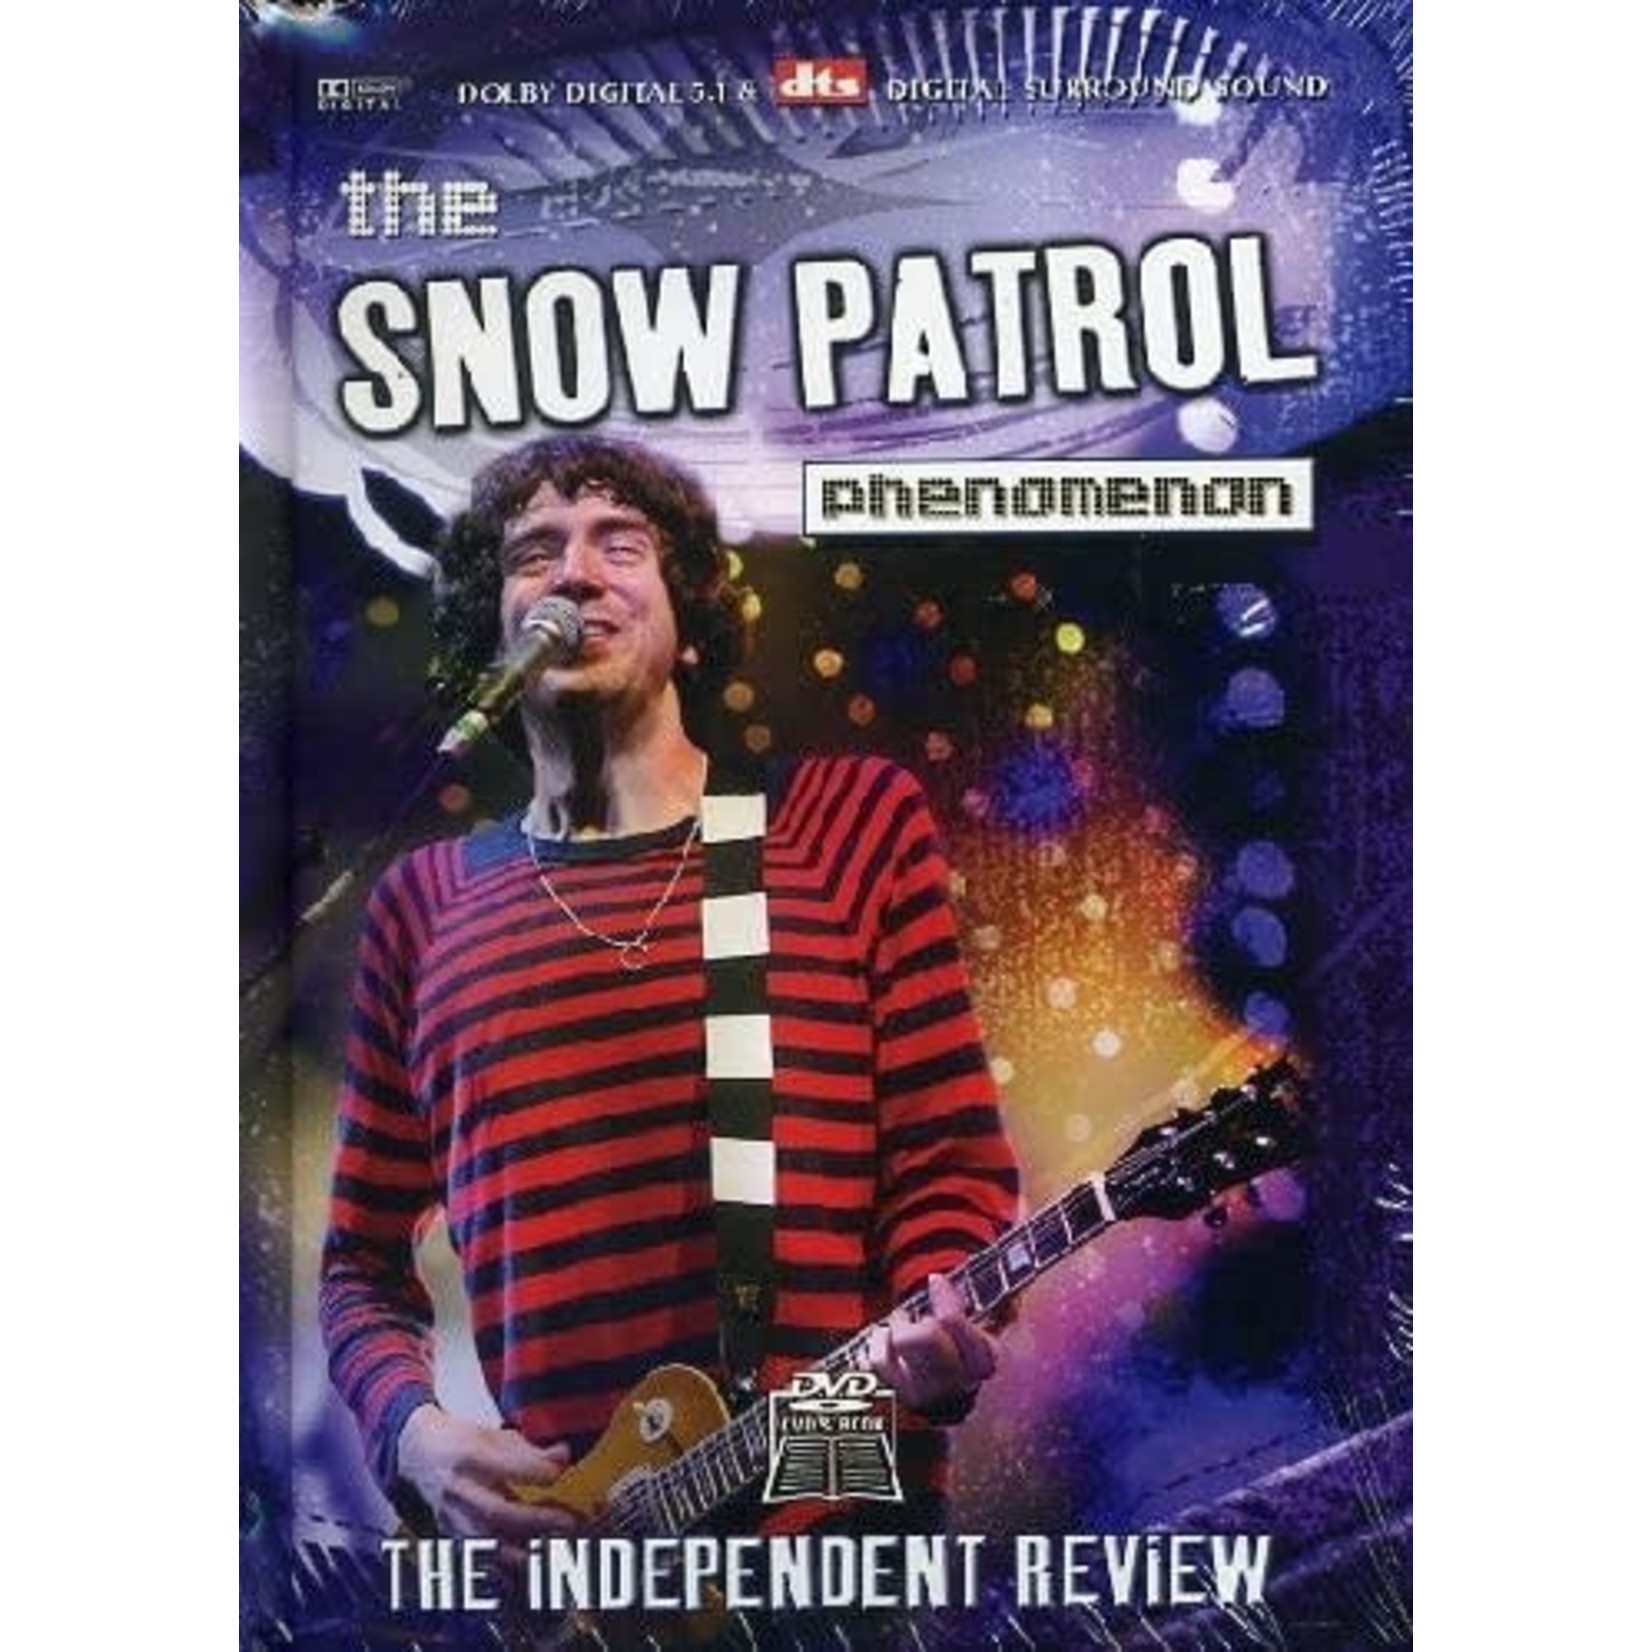 Snow Patrol - The Independent Review [USED DVD/Book]